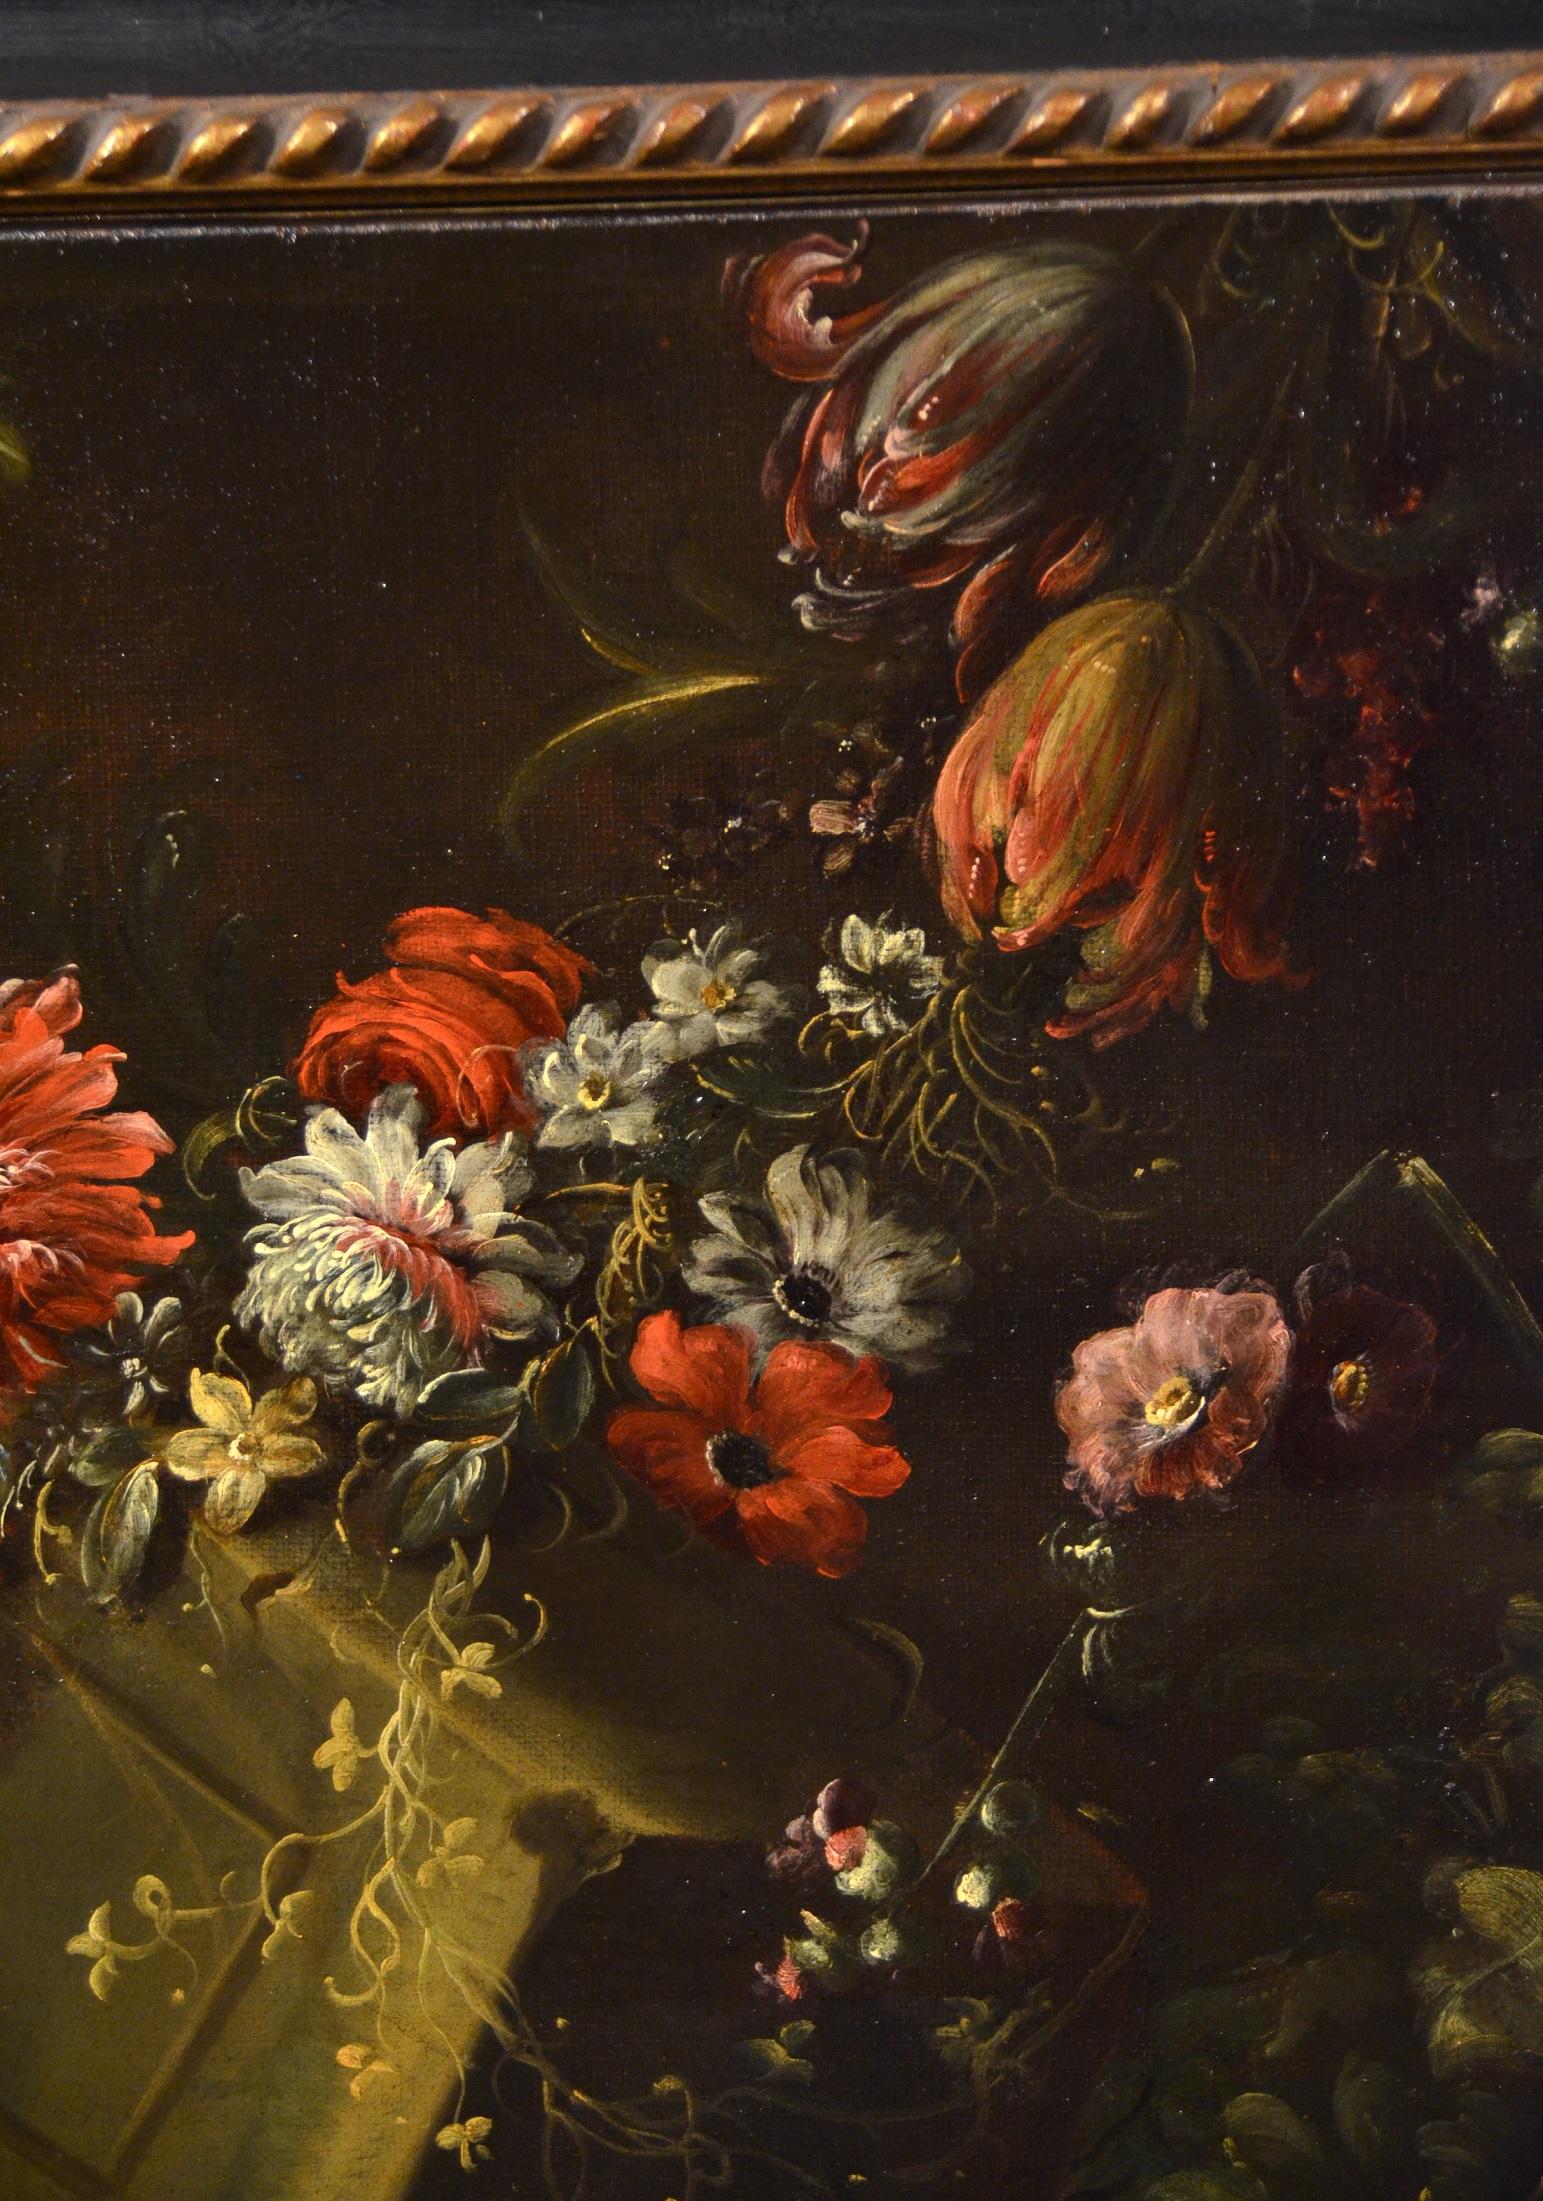 Pieter Casteels III 'Signed' Floral Still Life Old master Paint 18th Century Art - Old Masters Painting by Pieter Casteels III (Antwerp 1684 - 1749 Richmond)